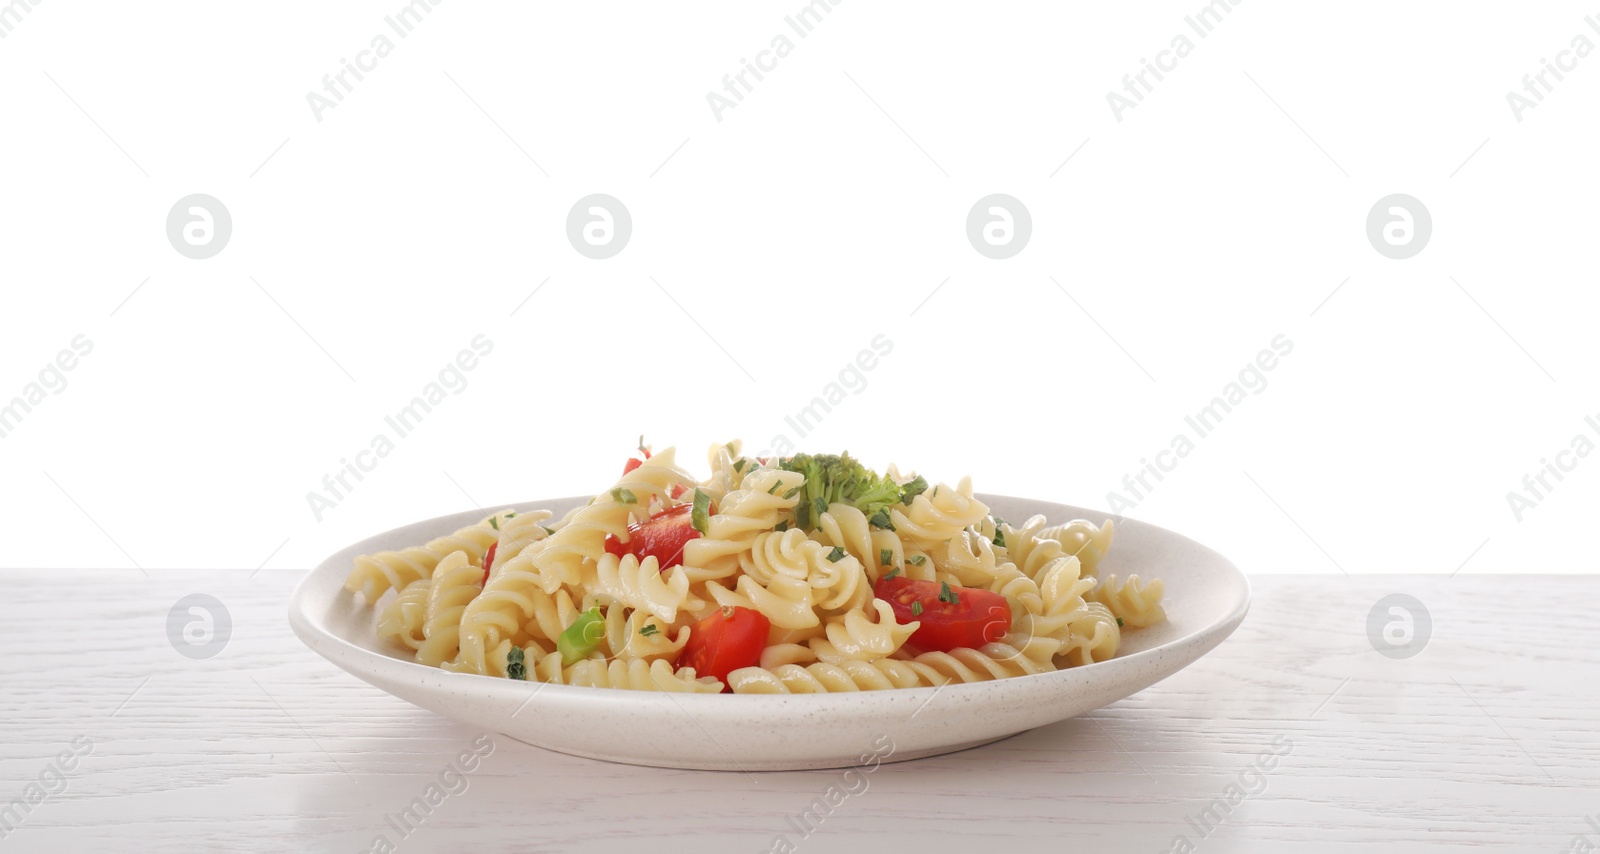 Photo of Tasty pasta with broccoli and cherry tomatoes on wooden table against white background